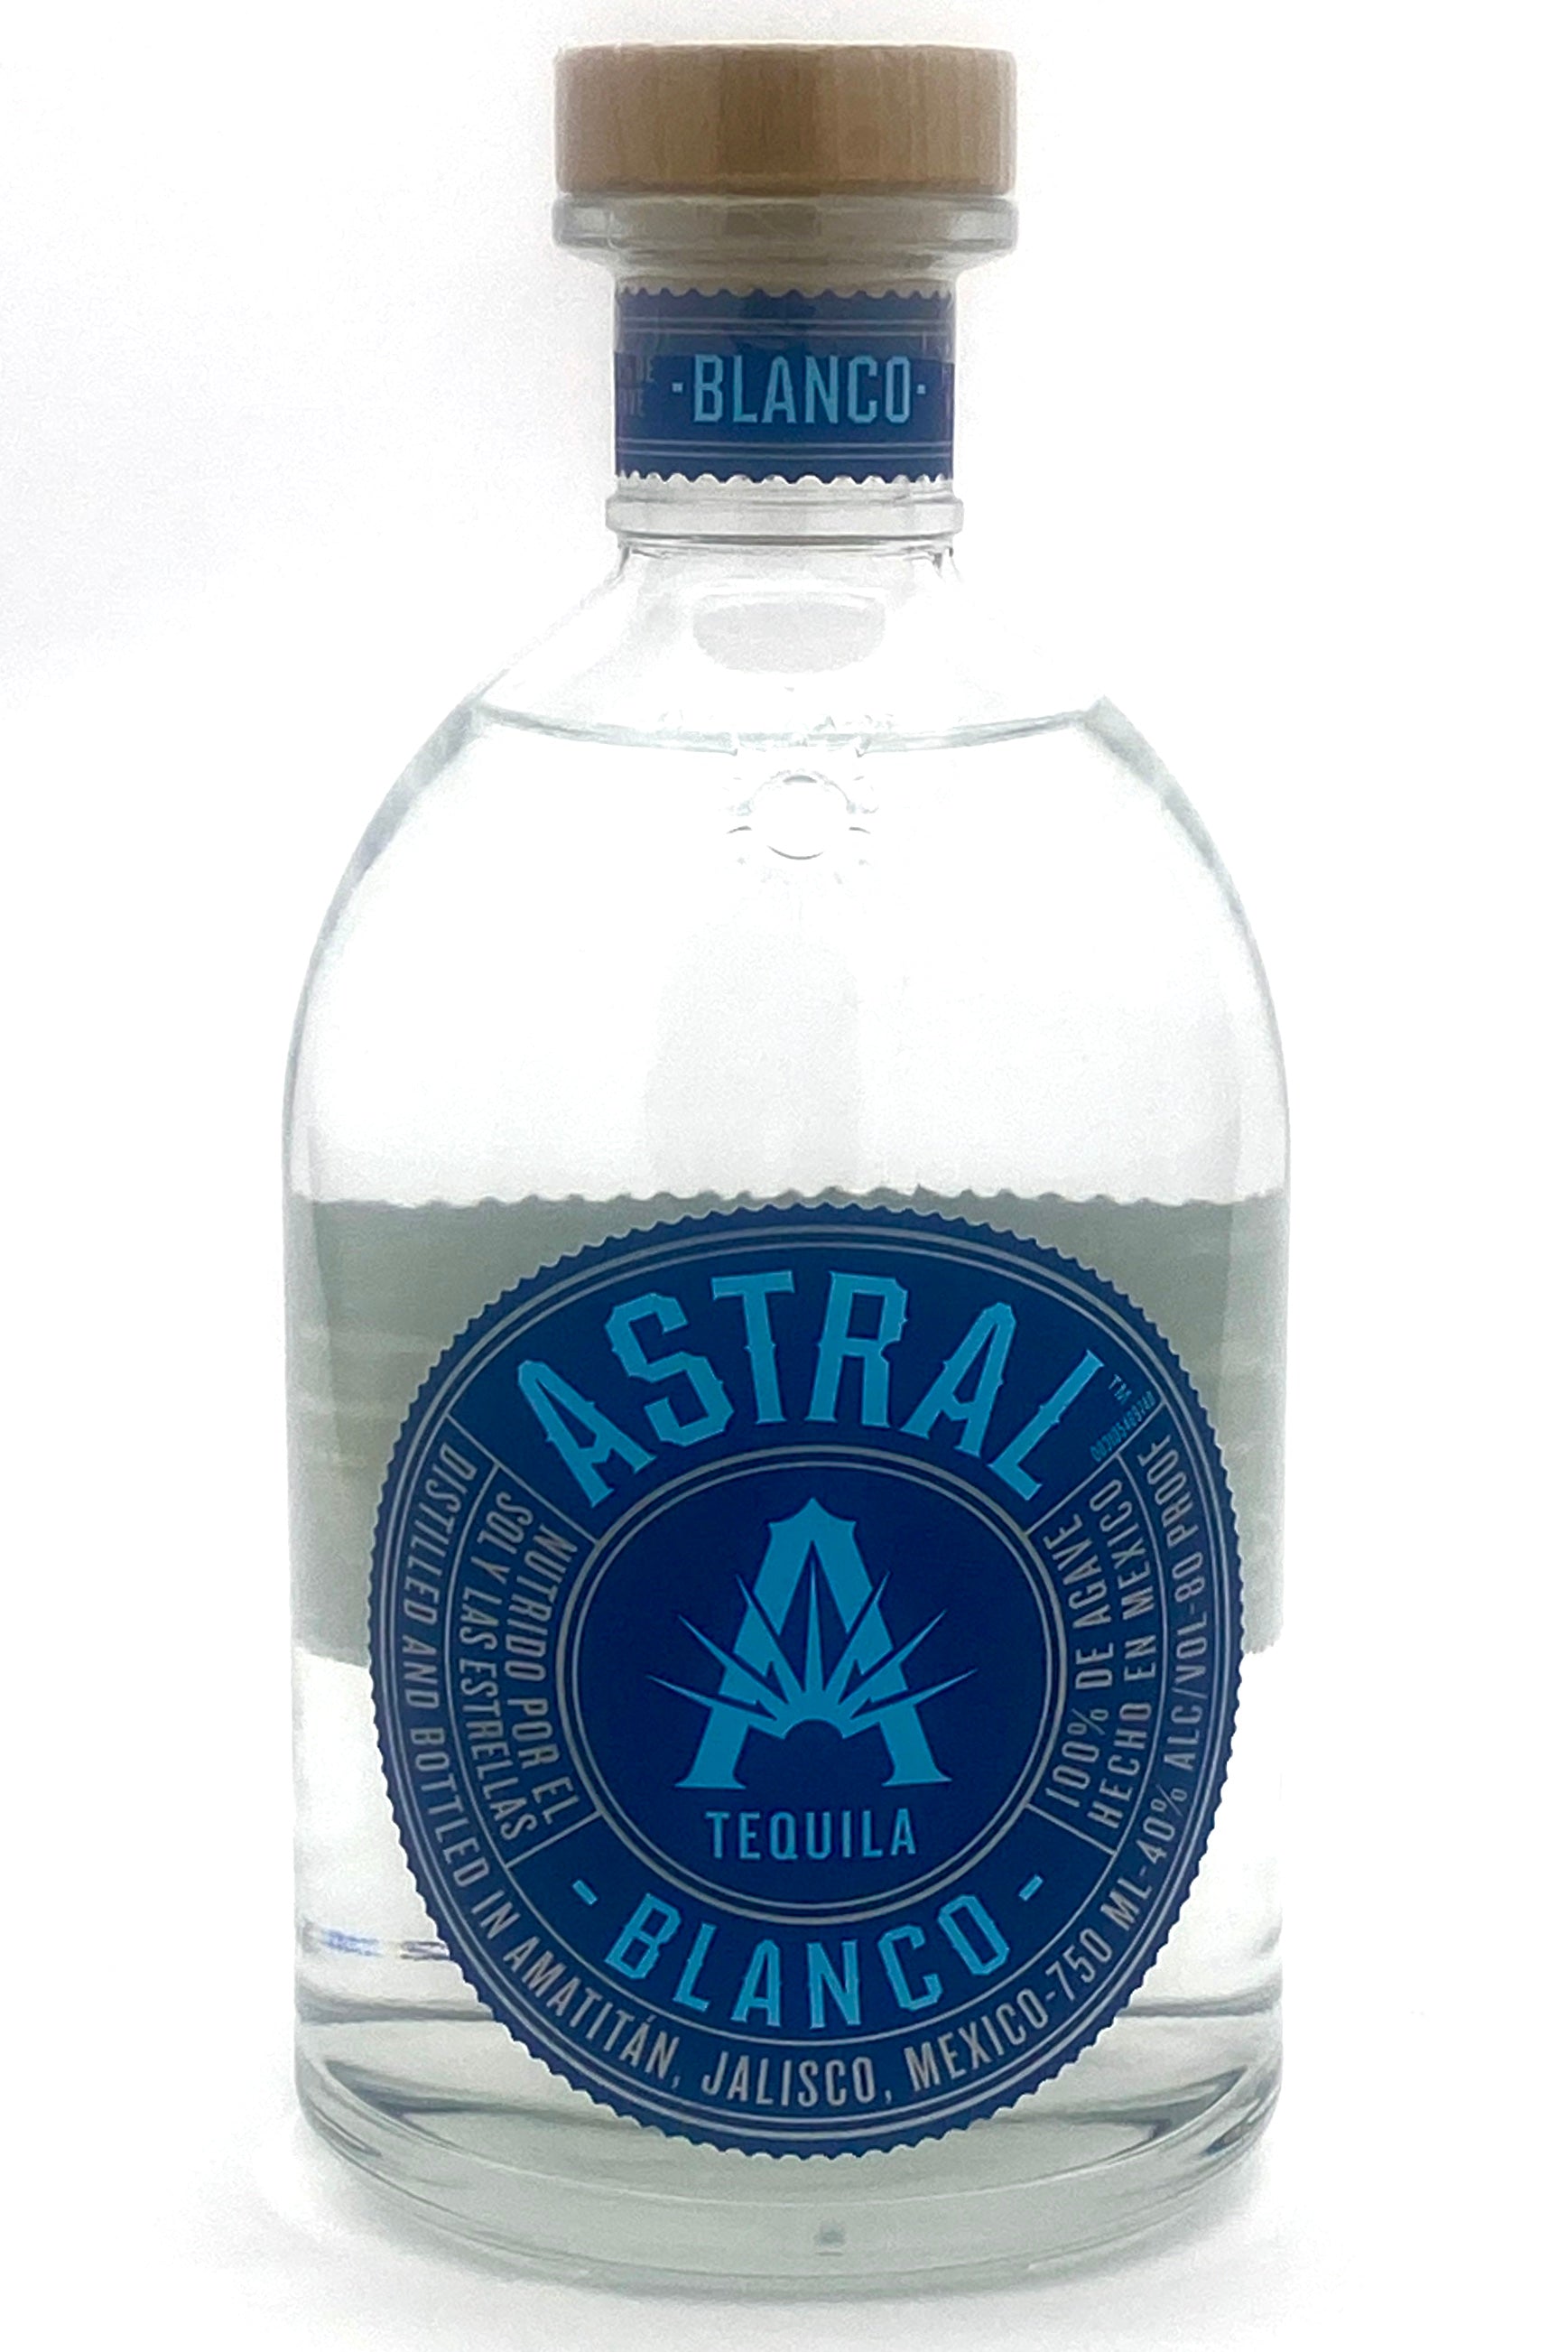 Buy Astral Tequila Blanco Online